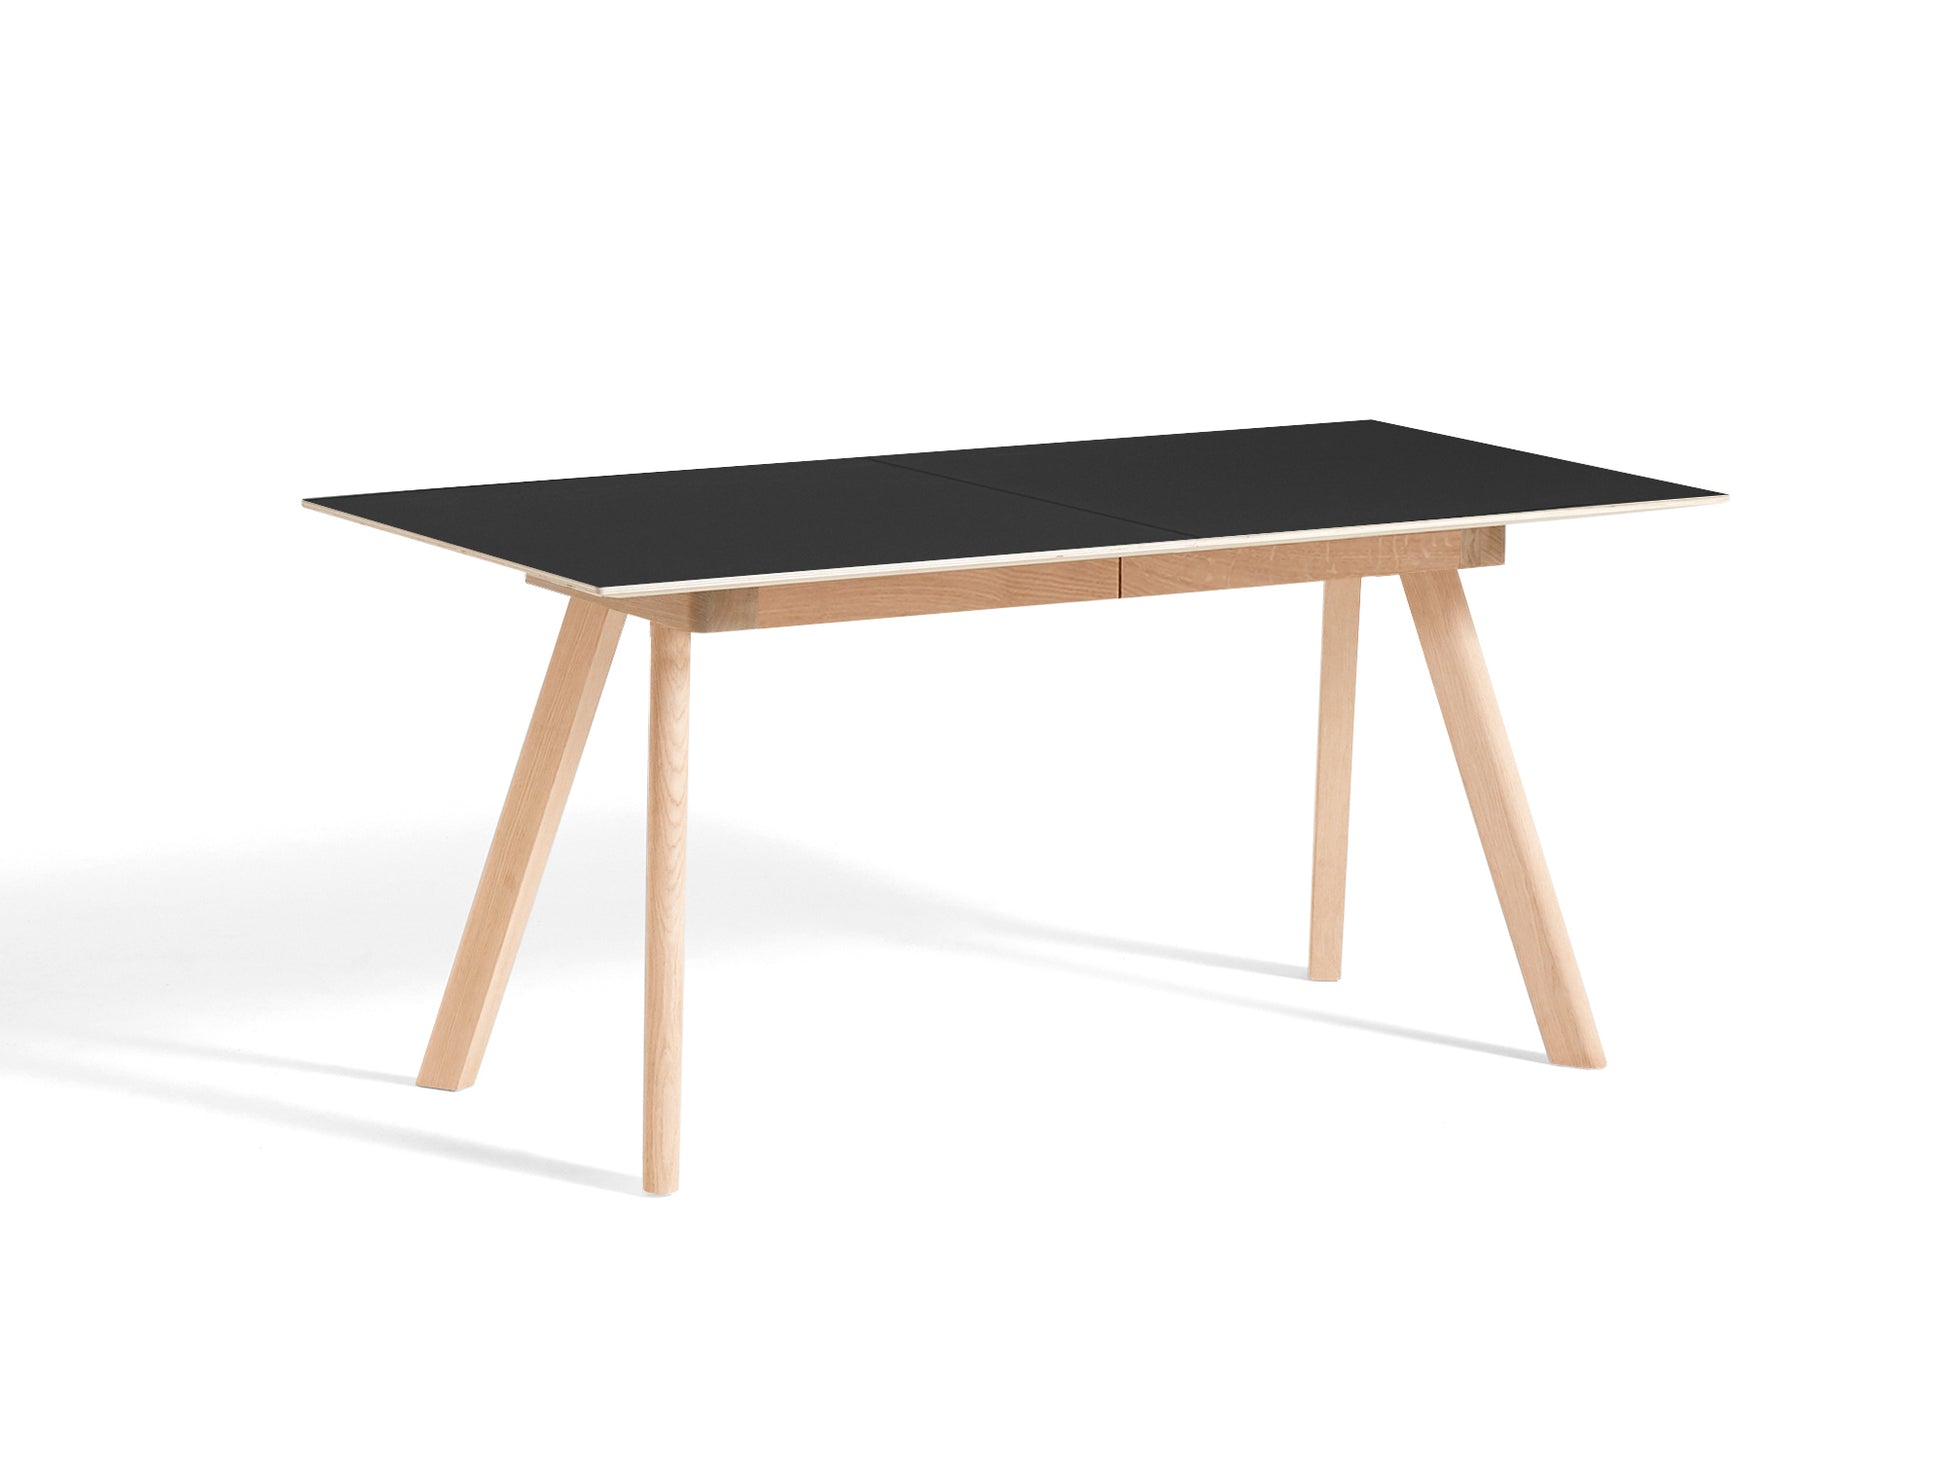 CPH30 Extendable Dining Table by HAY - L160 cm / Black Linoleum Tabletop with Soaped Oak Base